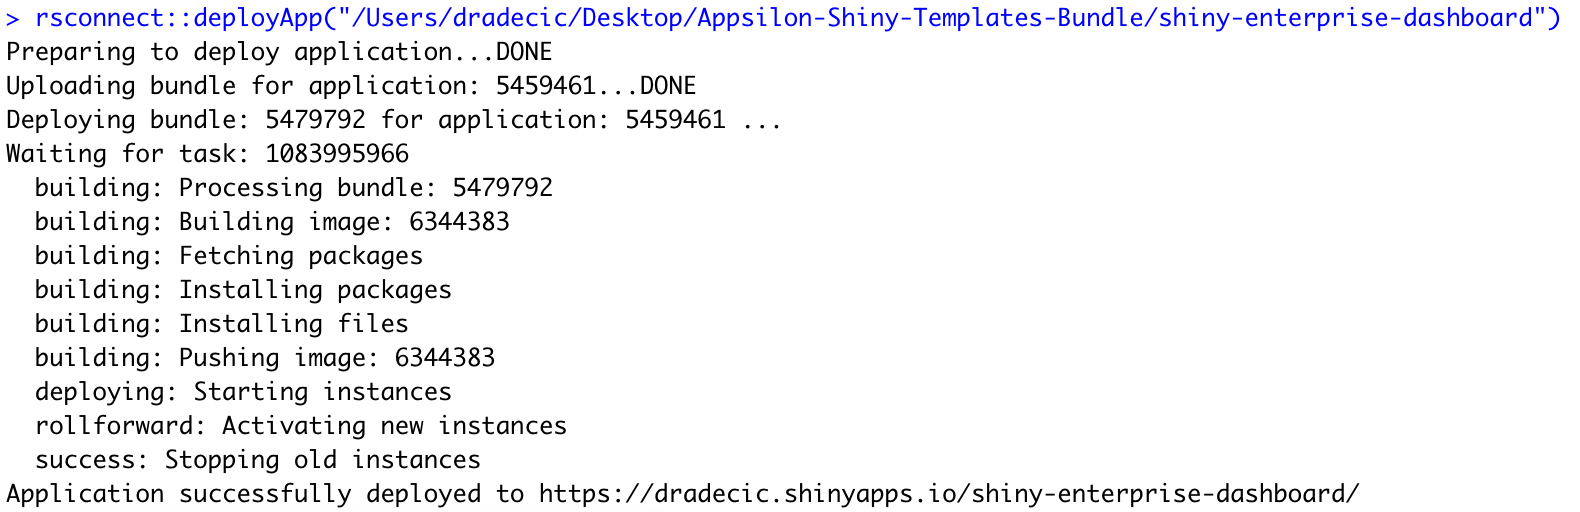 Image 7 - Deployment to shinyapps.io through R console